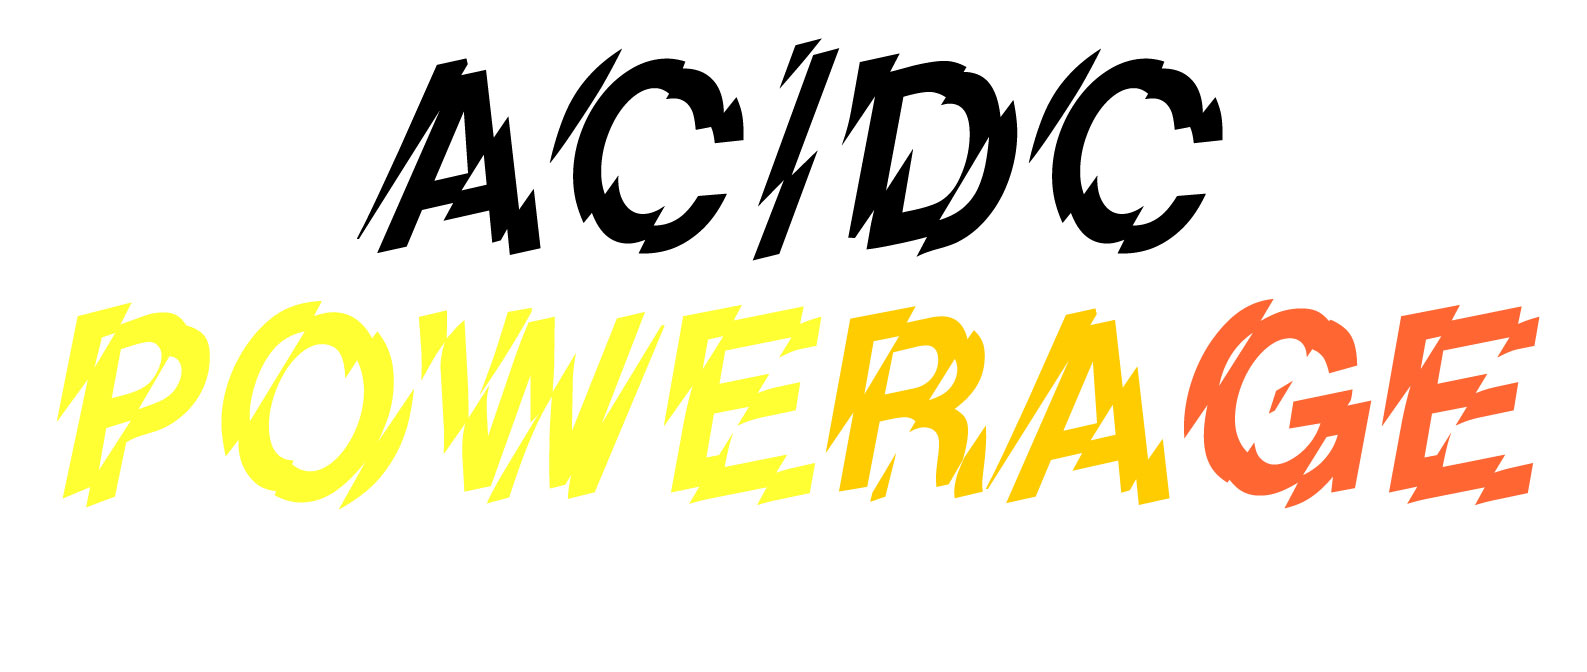 AC/DC and lettering | What's Font?